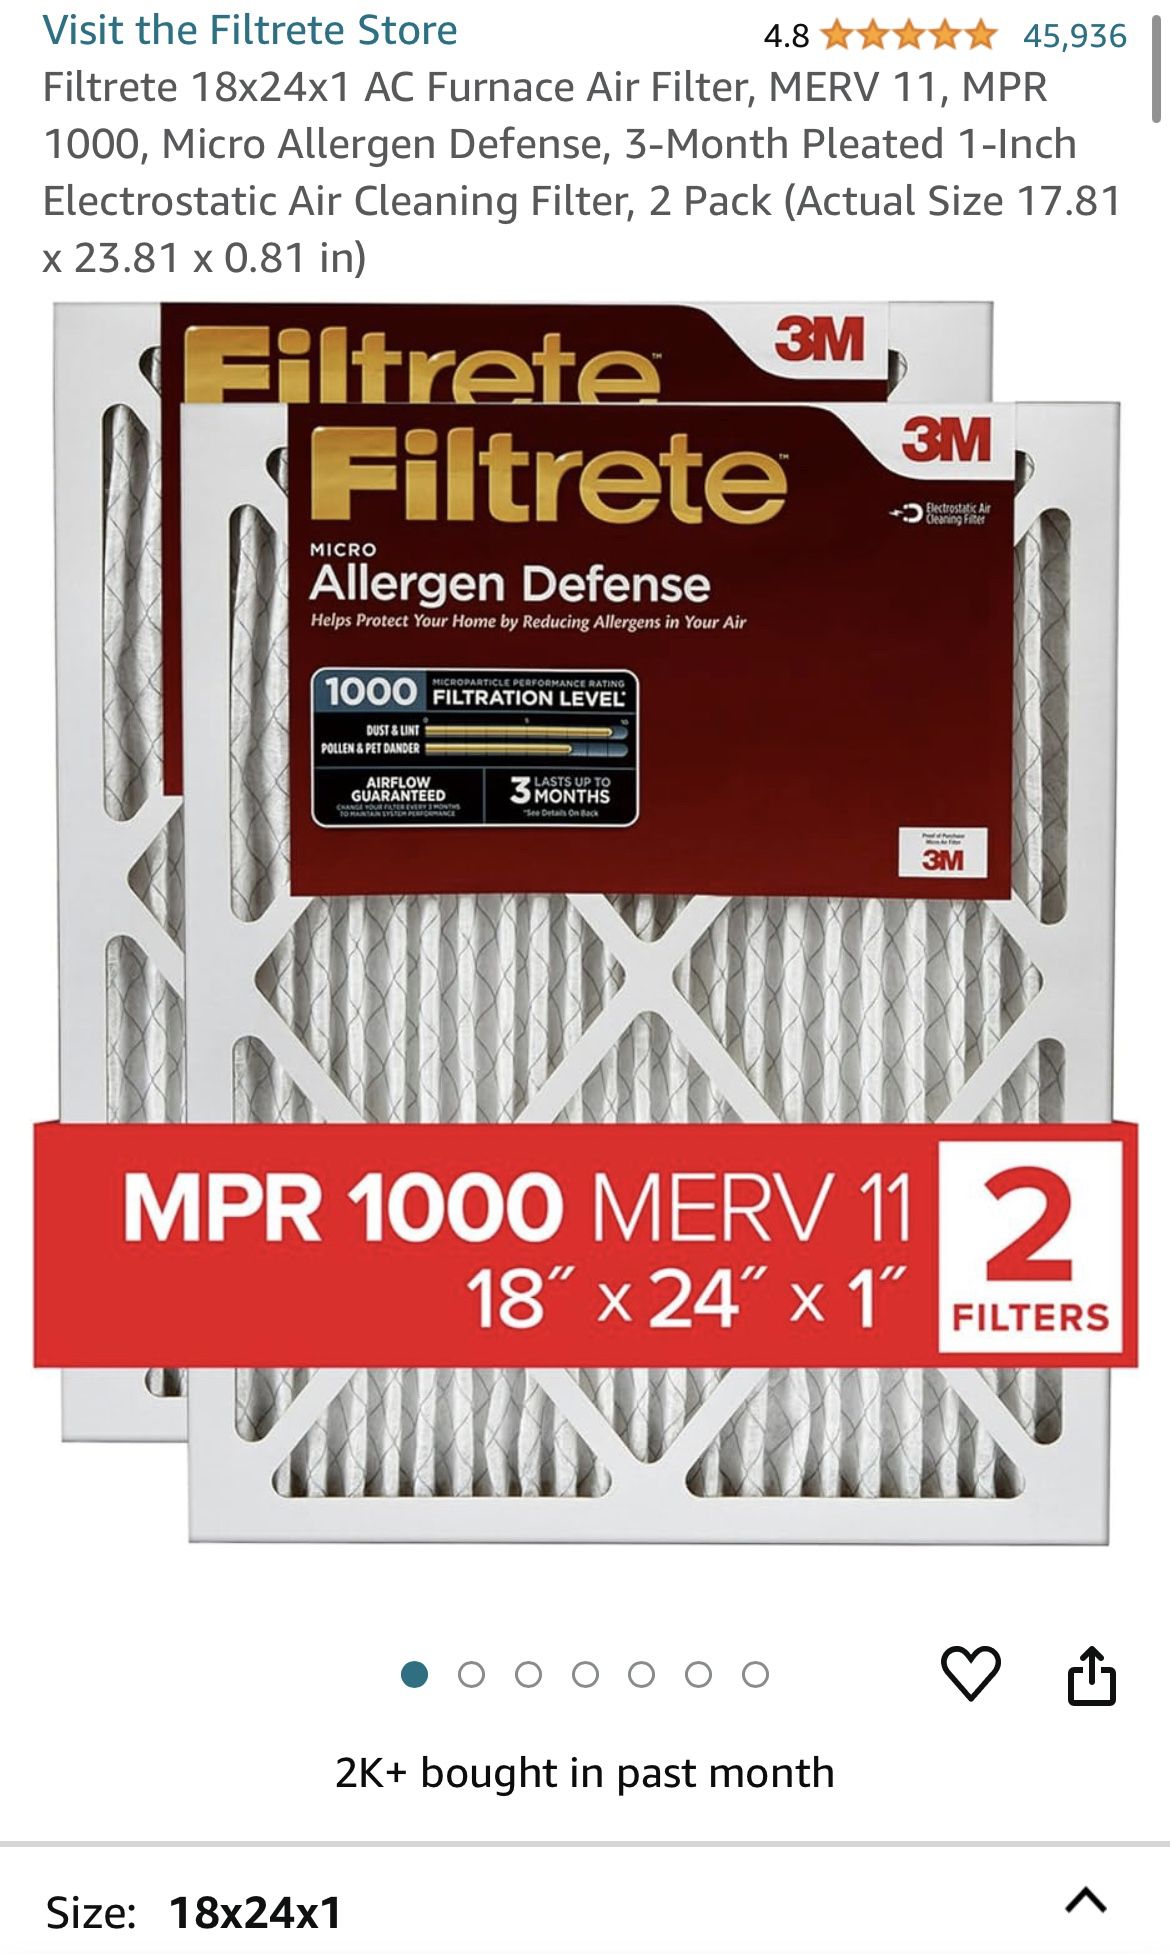 Filtrete 18x24x1 AC Furnace Air Filter, MERV 11, MPR 1000, Micro Allergen Defense, 3-Month Pleated 1-Inch Electrostatic Air Cleaning Filter, 2 Pack (A